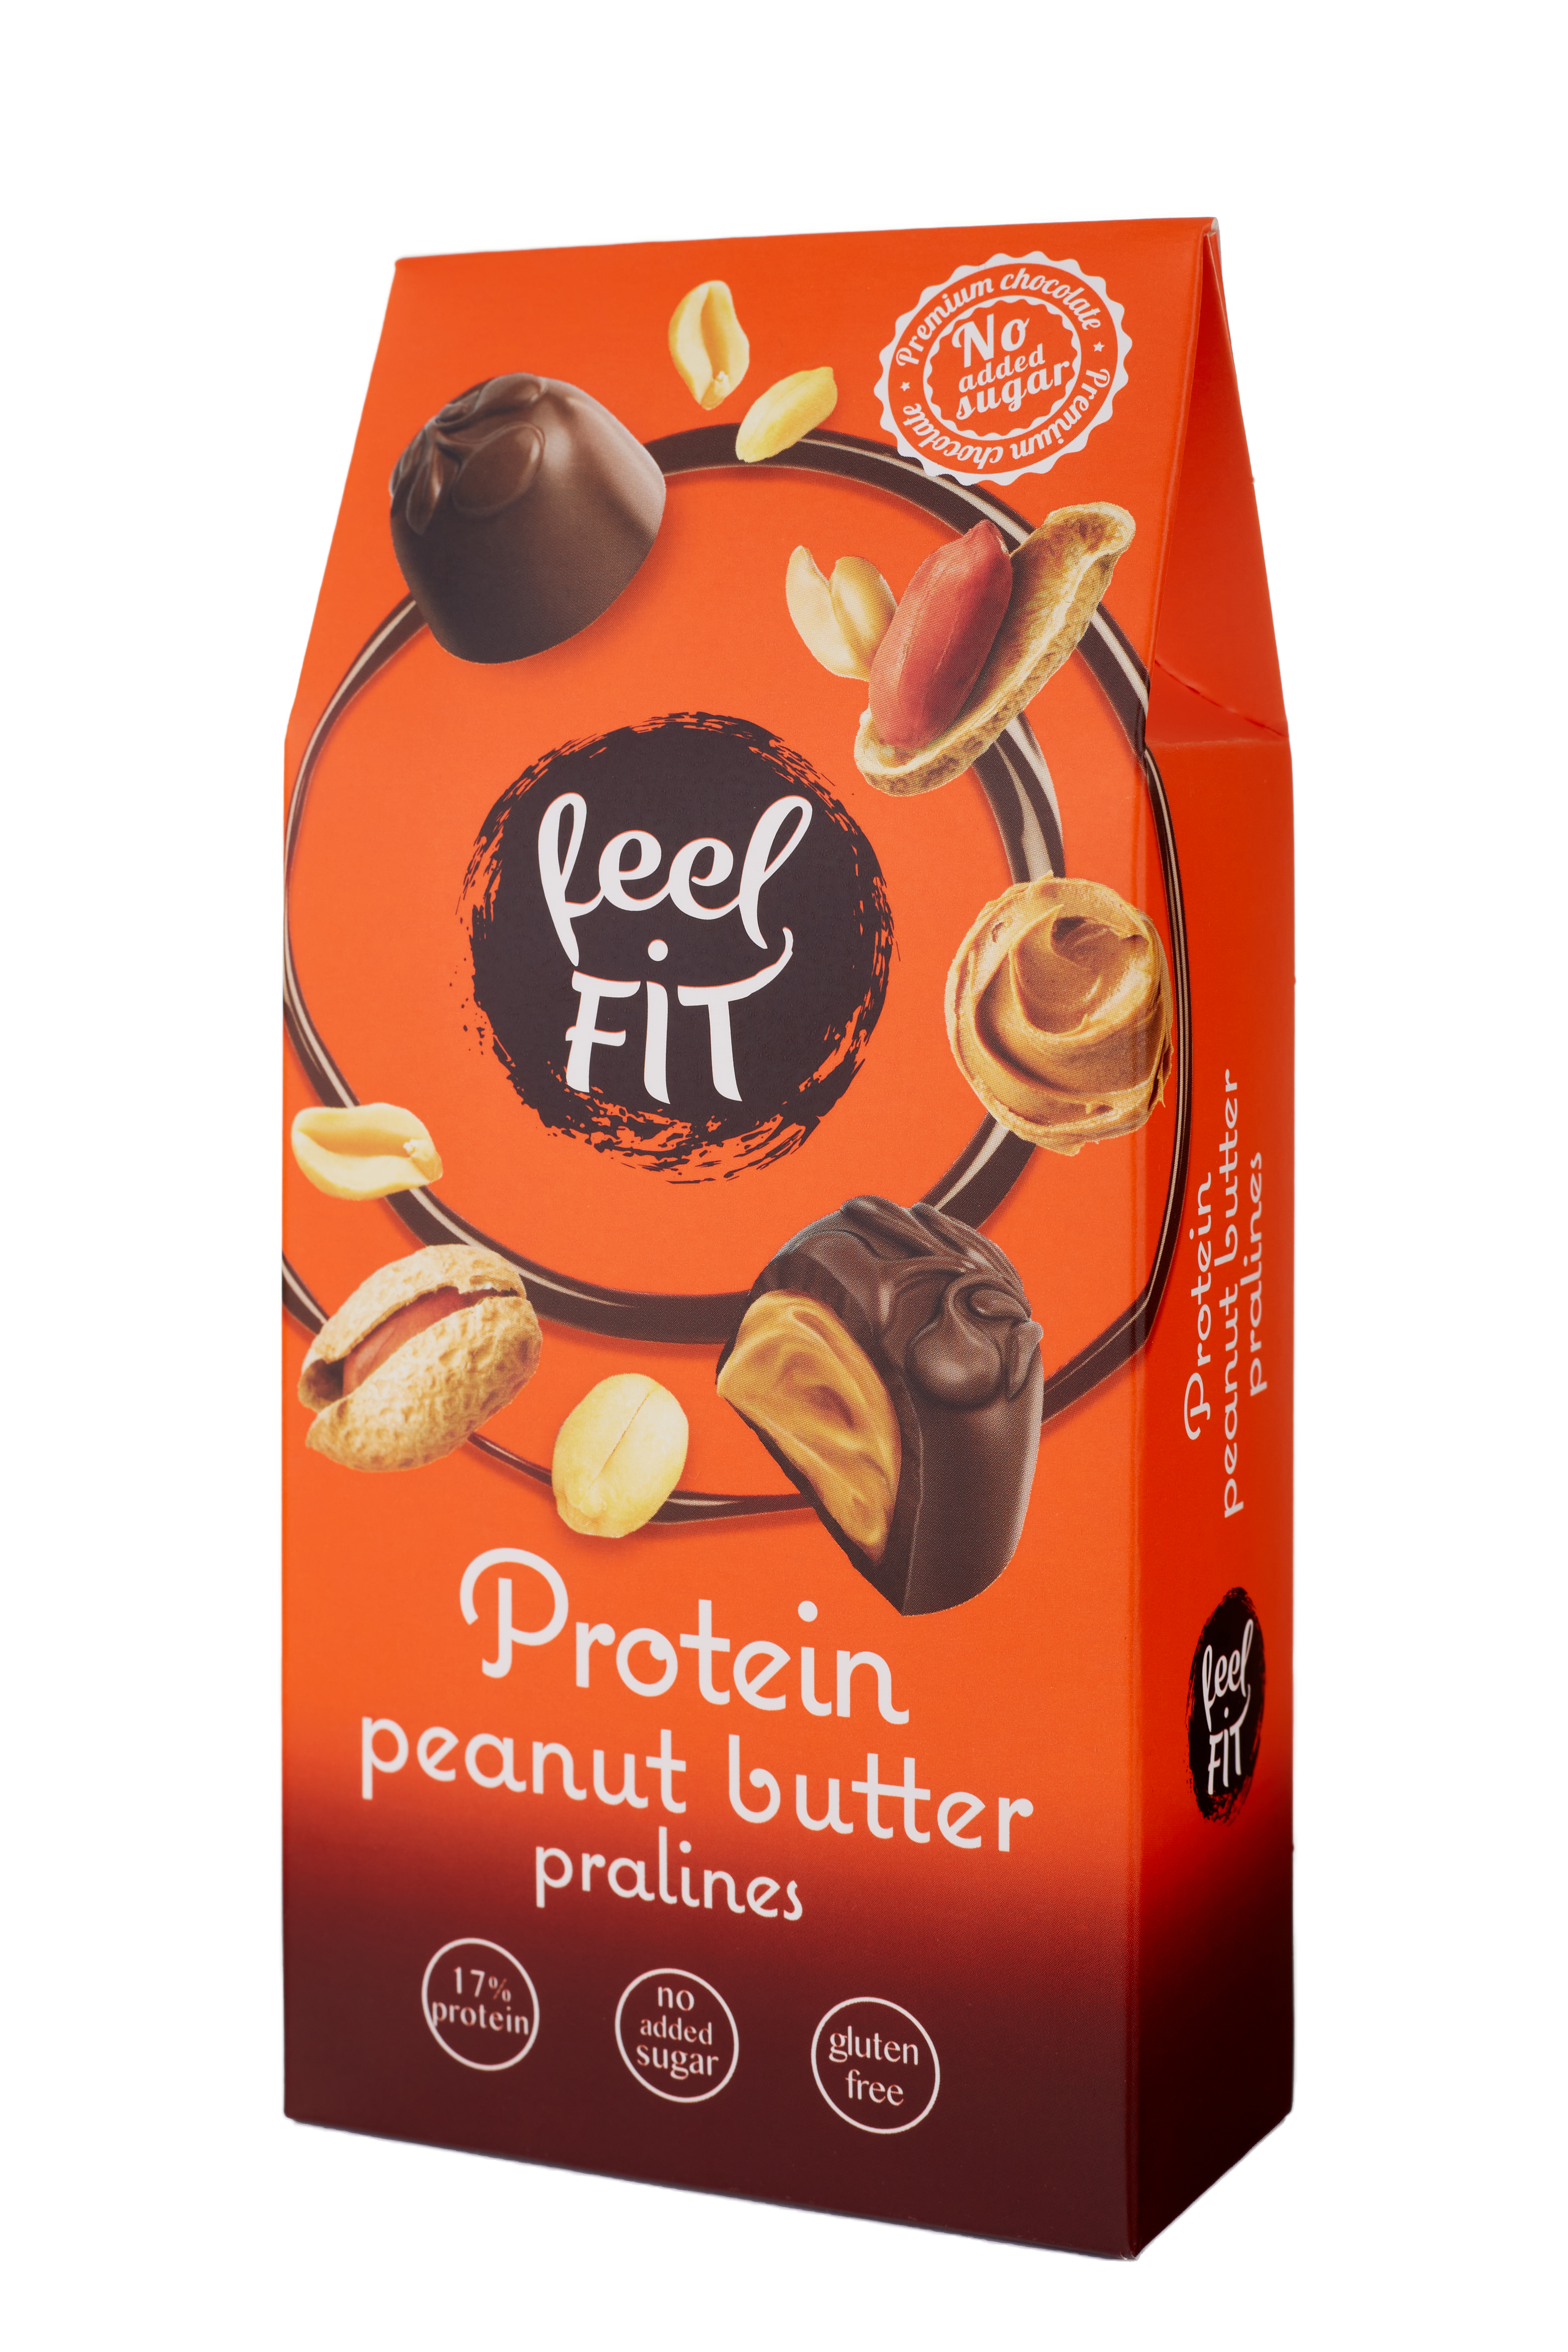 Feel FIT protein peanut butter pralines 66g_5903246877380